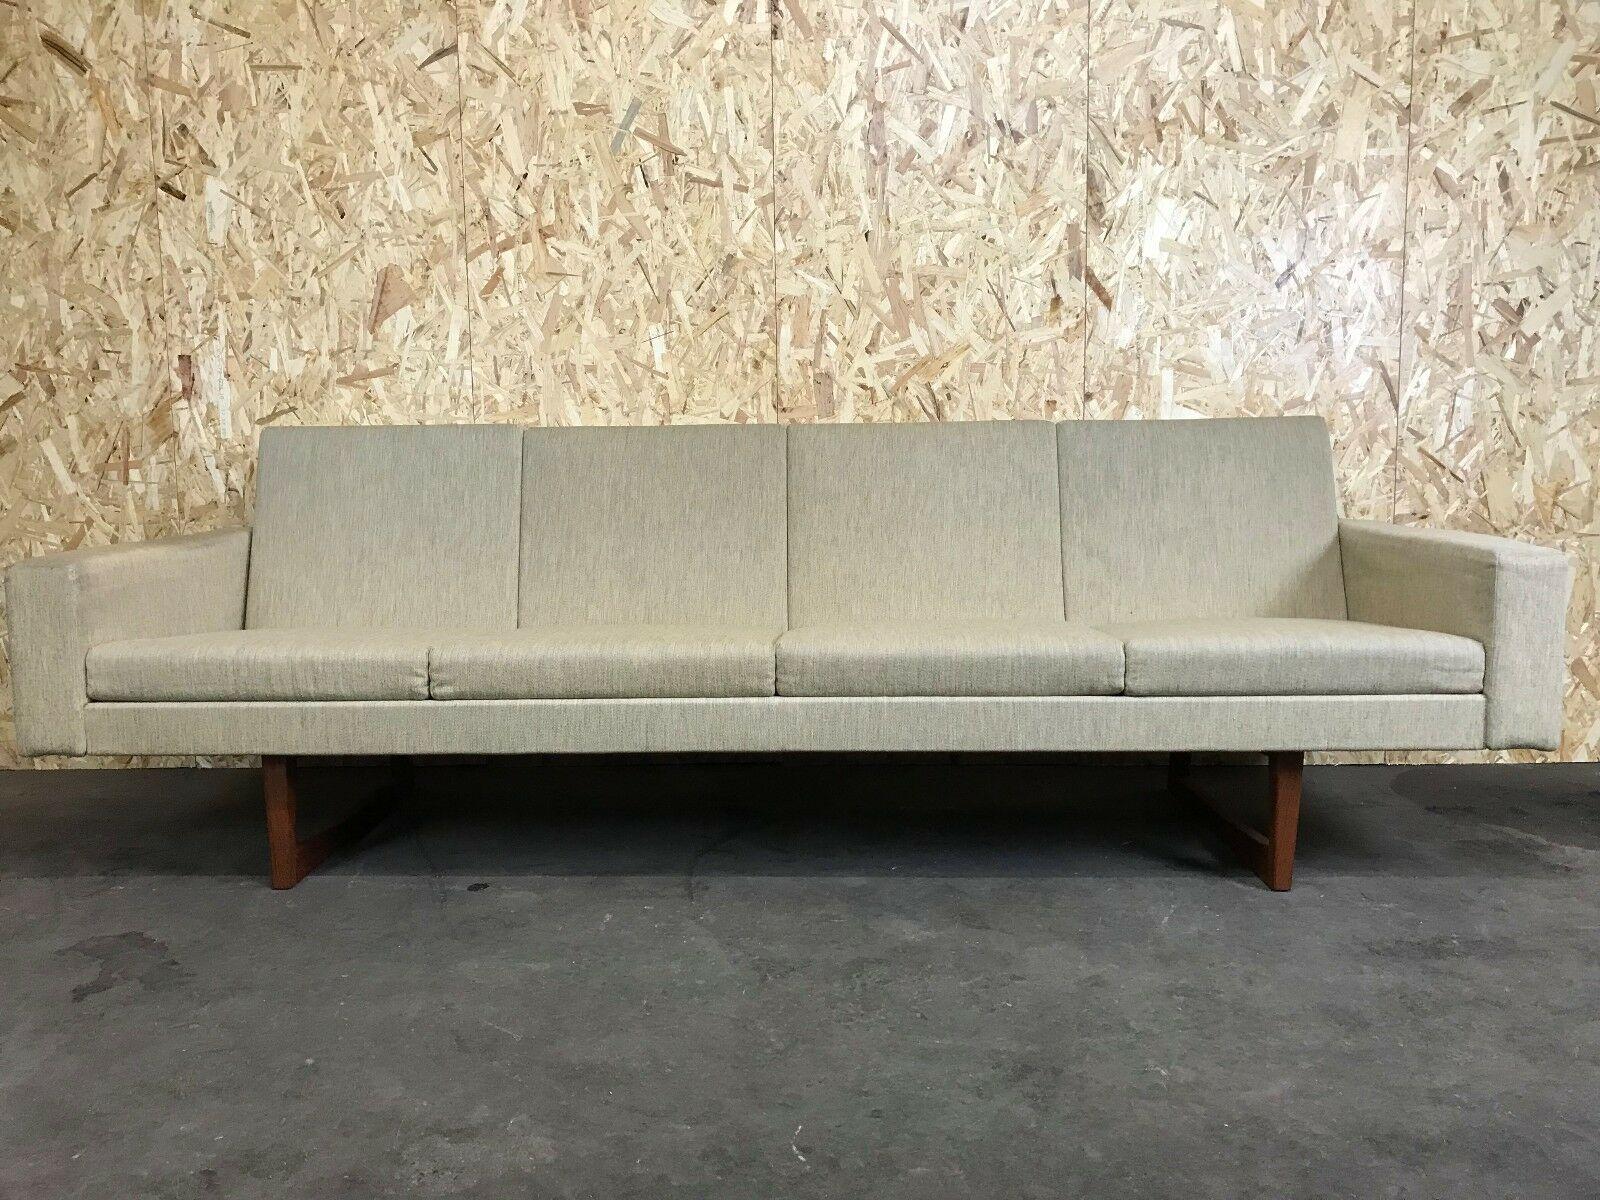 60s 70s teak sofa by Ingvar Andersson Effkå Swedish Swedish design

Object: sofa

Manufacturer: Effka

Condition: good

Age: around 1960-1970

Dimensions:

226cm x 76cm x 72.5cm
Seat height = 39cm

Other notes:

The pictures serve